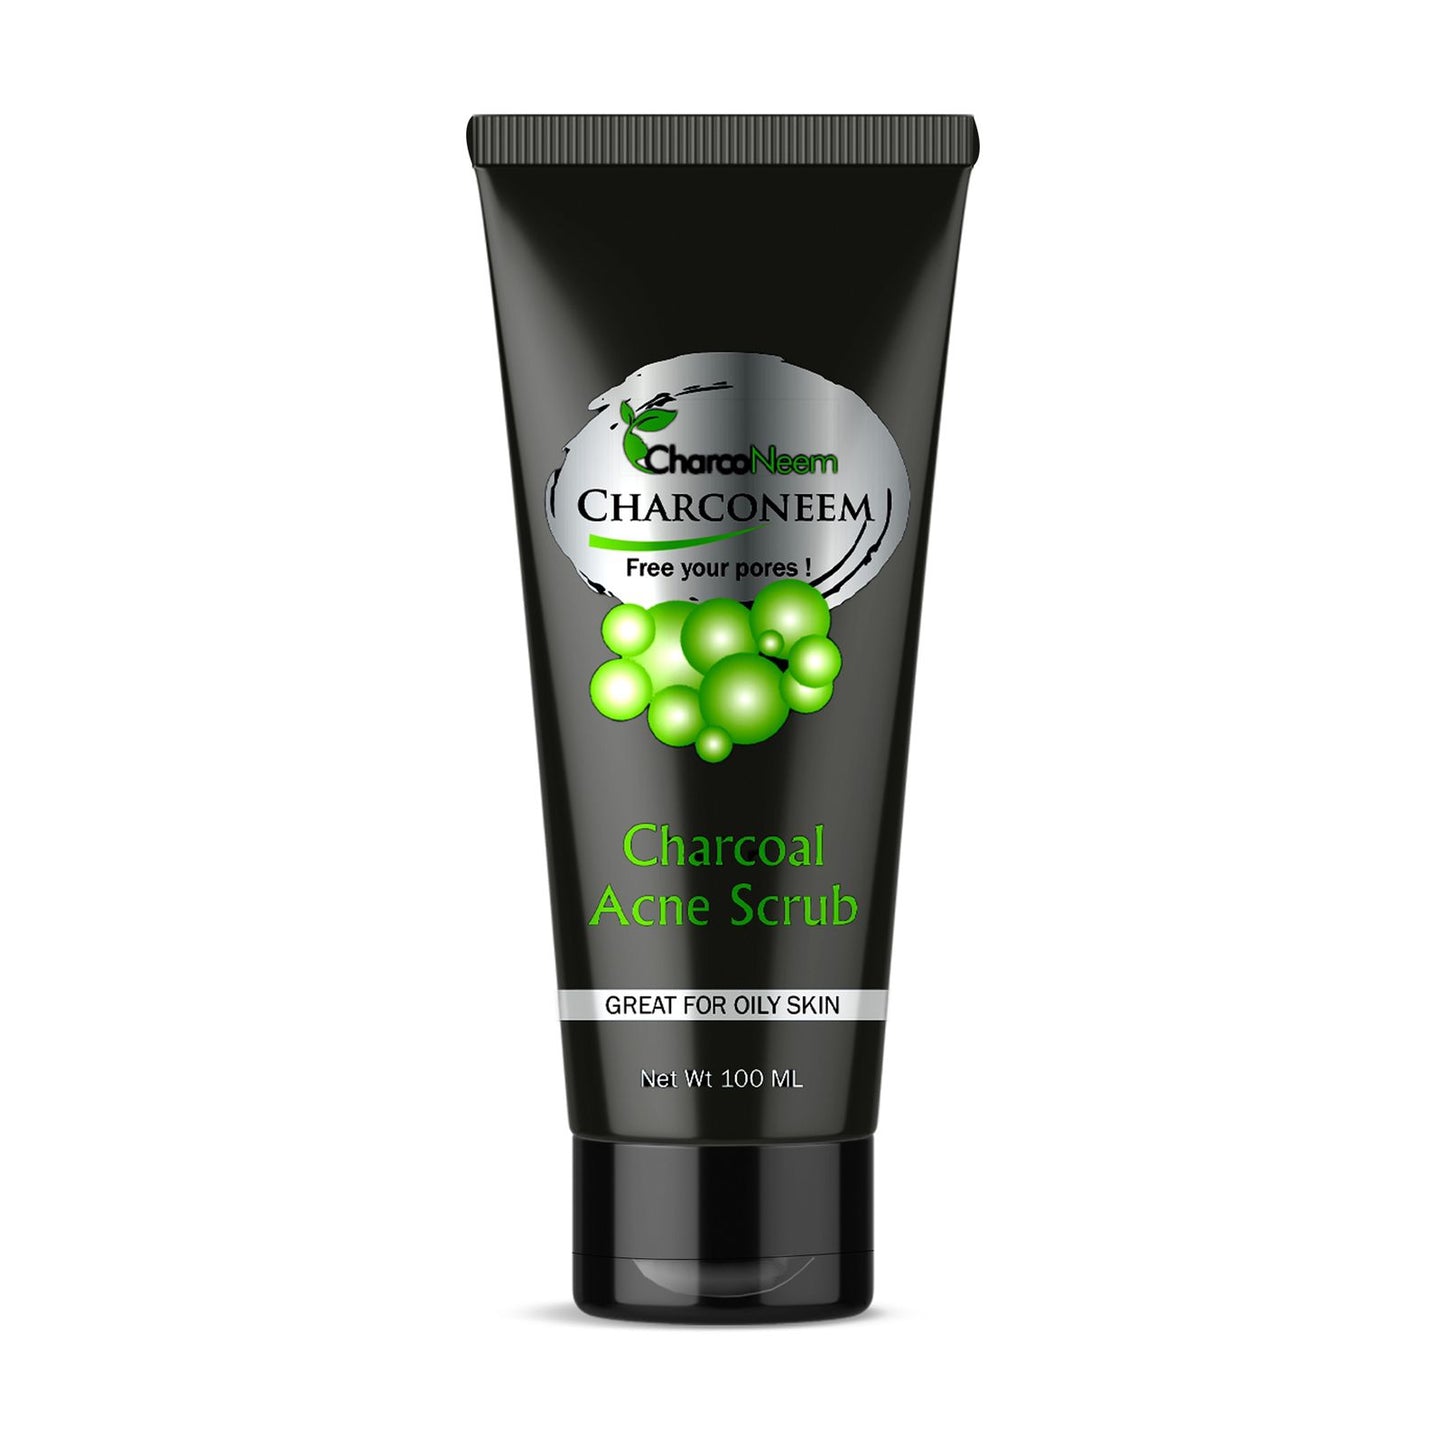 CharcoNeem Charcoal Acne Face Scrub  With Neem Extract And  Natural Charcoal Helps Prevent Breakouts and Absorb Oil for Deep Pore Cleansing 100 ml